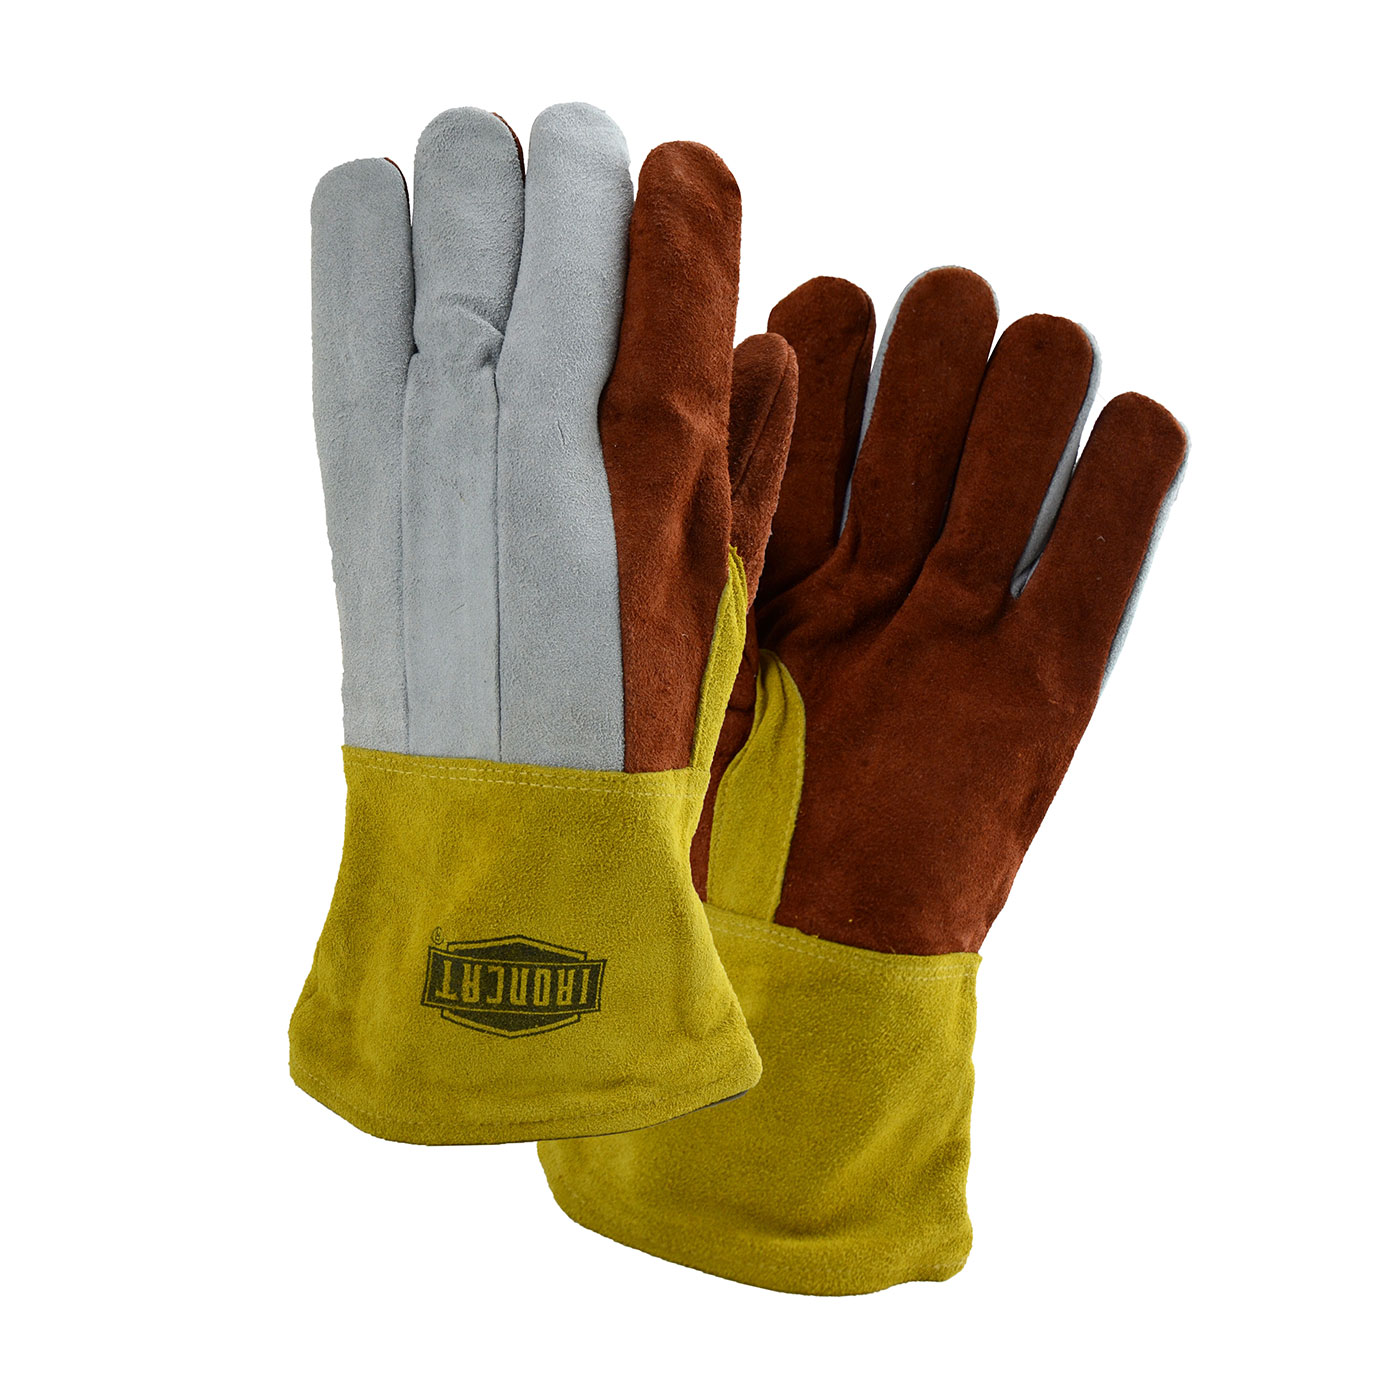 Ironcat® 14 Premium Rust Cotton Lined & Kevlar Stitched Heavy Split Cowhide Foundry Gloves